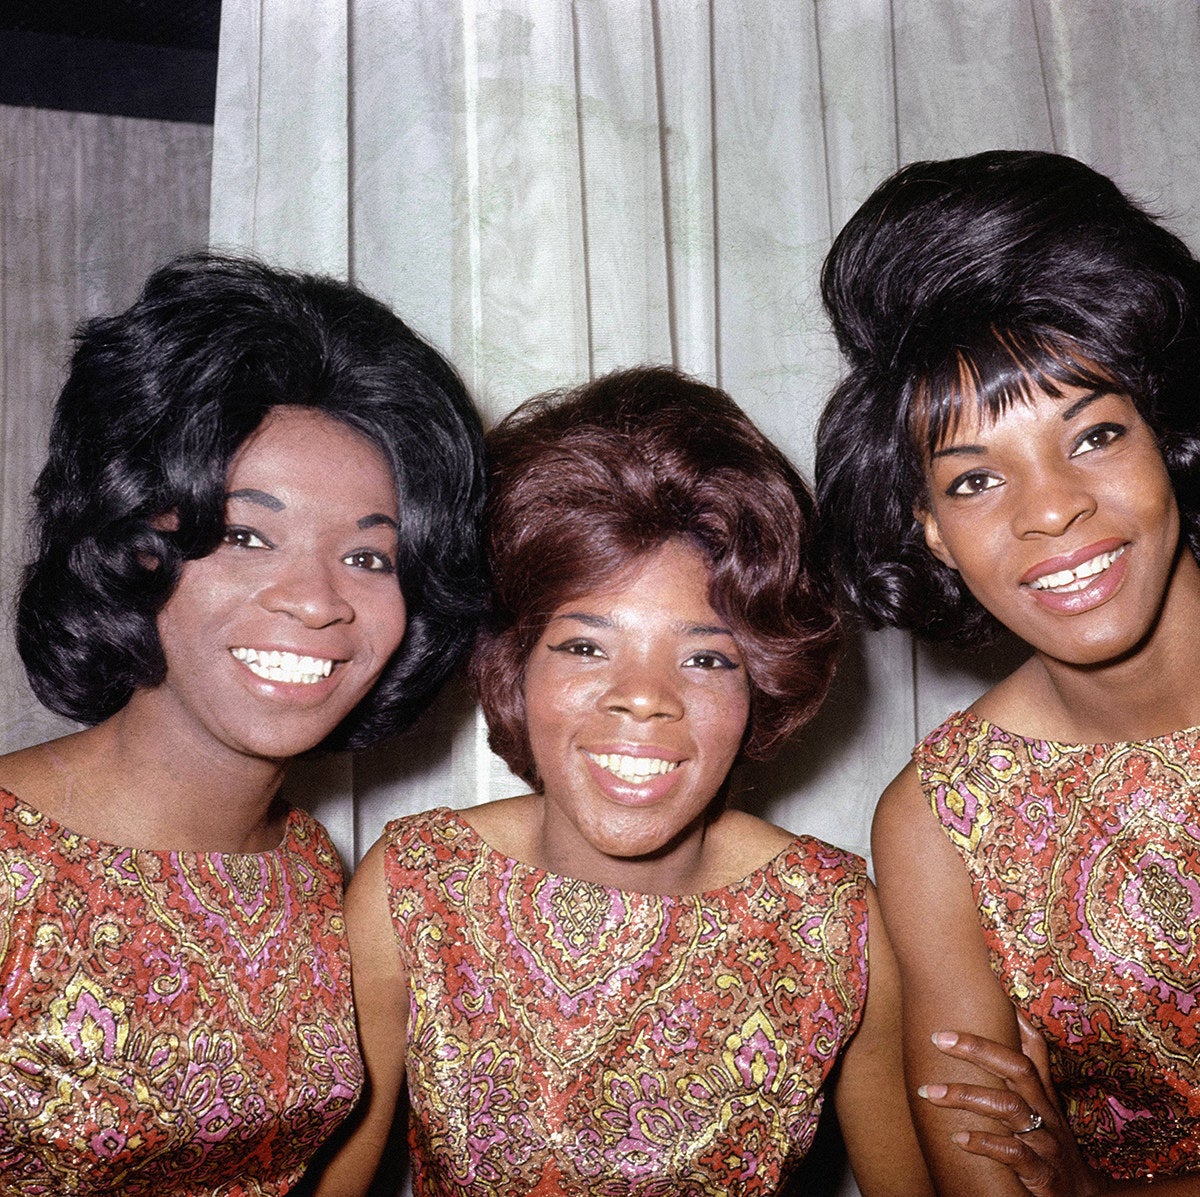 23 Incredible Pictures Of Motown In The 1960s